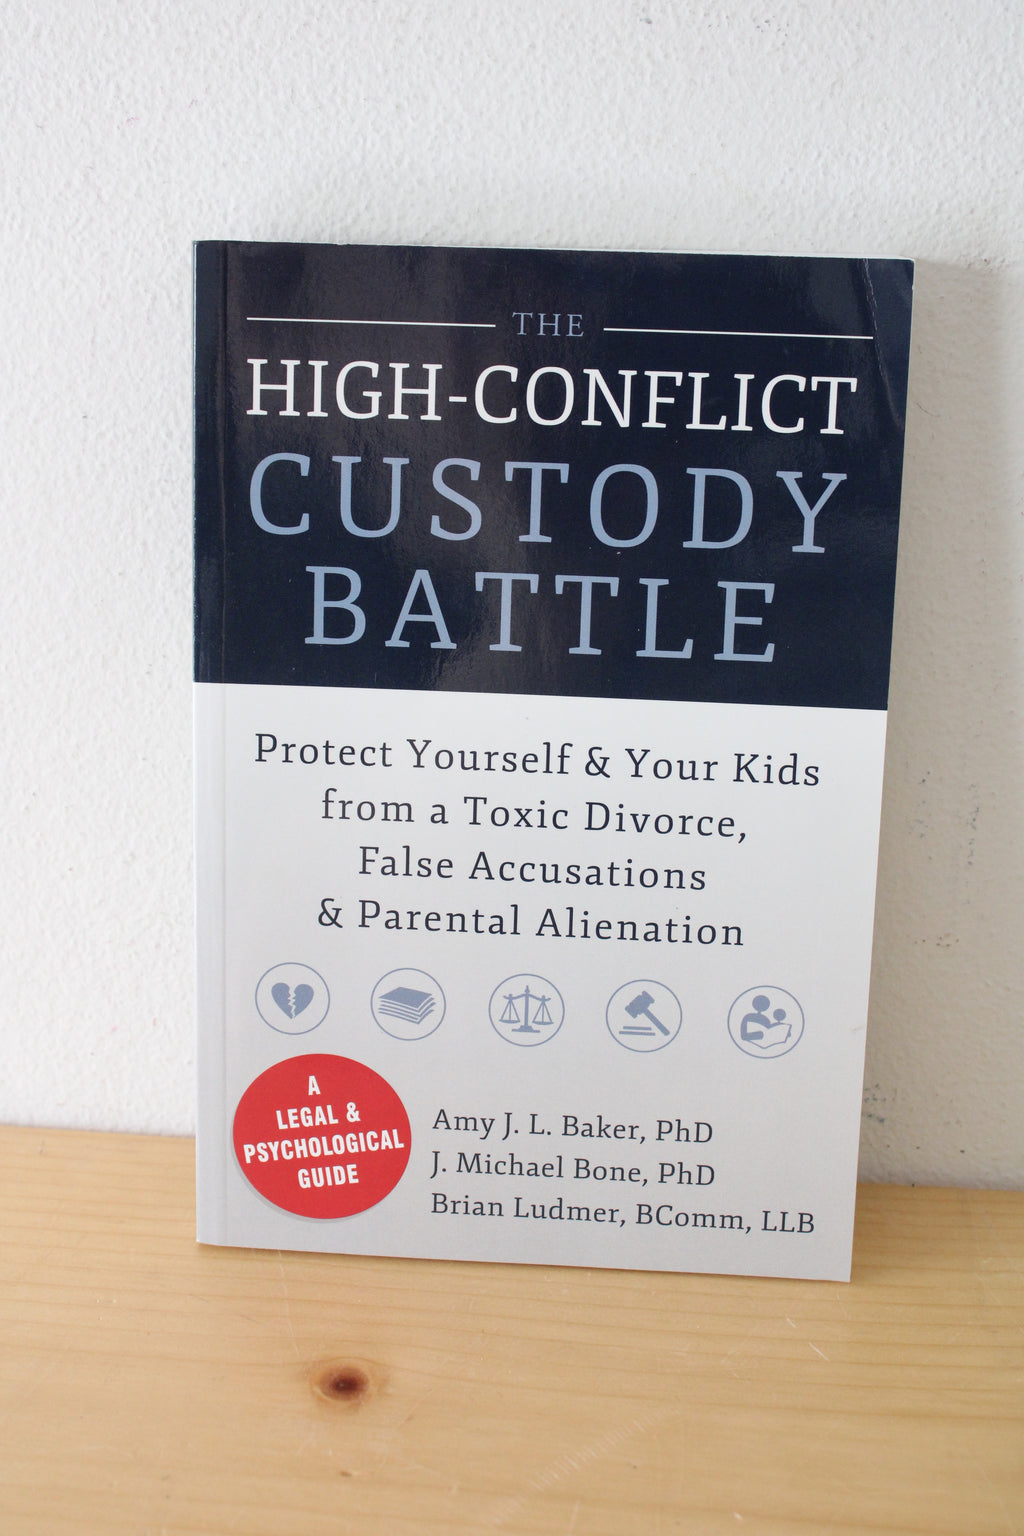 The High-Conflict Custody Battle: Protect Yourself & Your Kids From A Toxic Divorce, False Accusations, & Parental Alienation. By Amy J. L. Baker, J. Michael Bone, And Brian Ludmer.